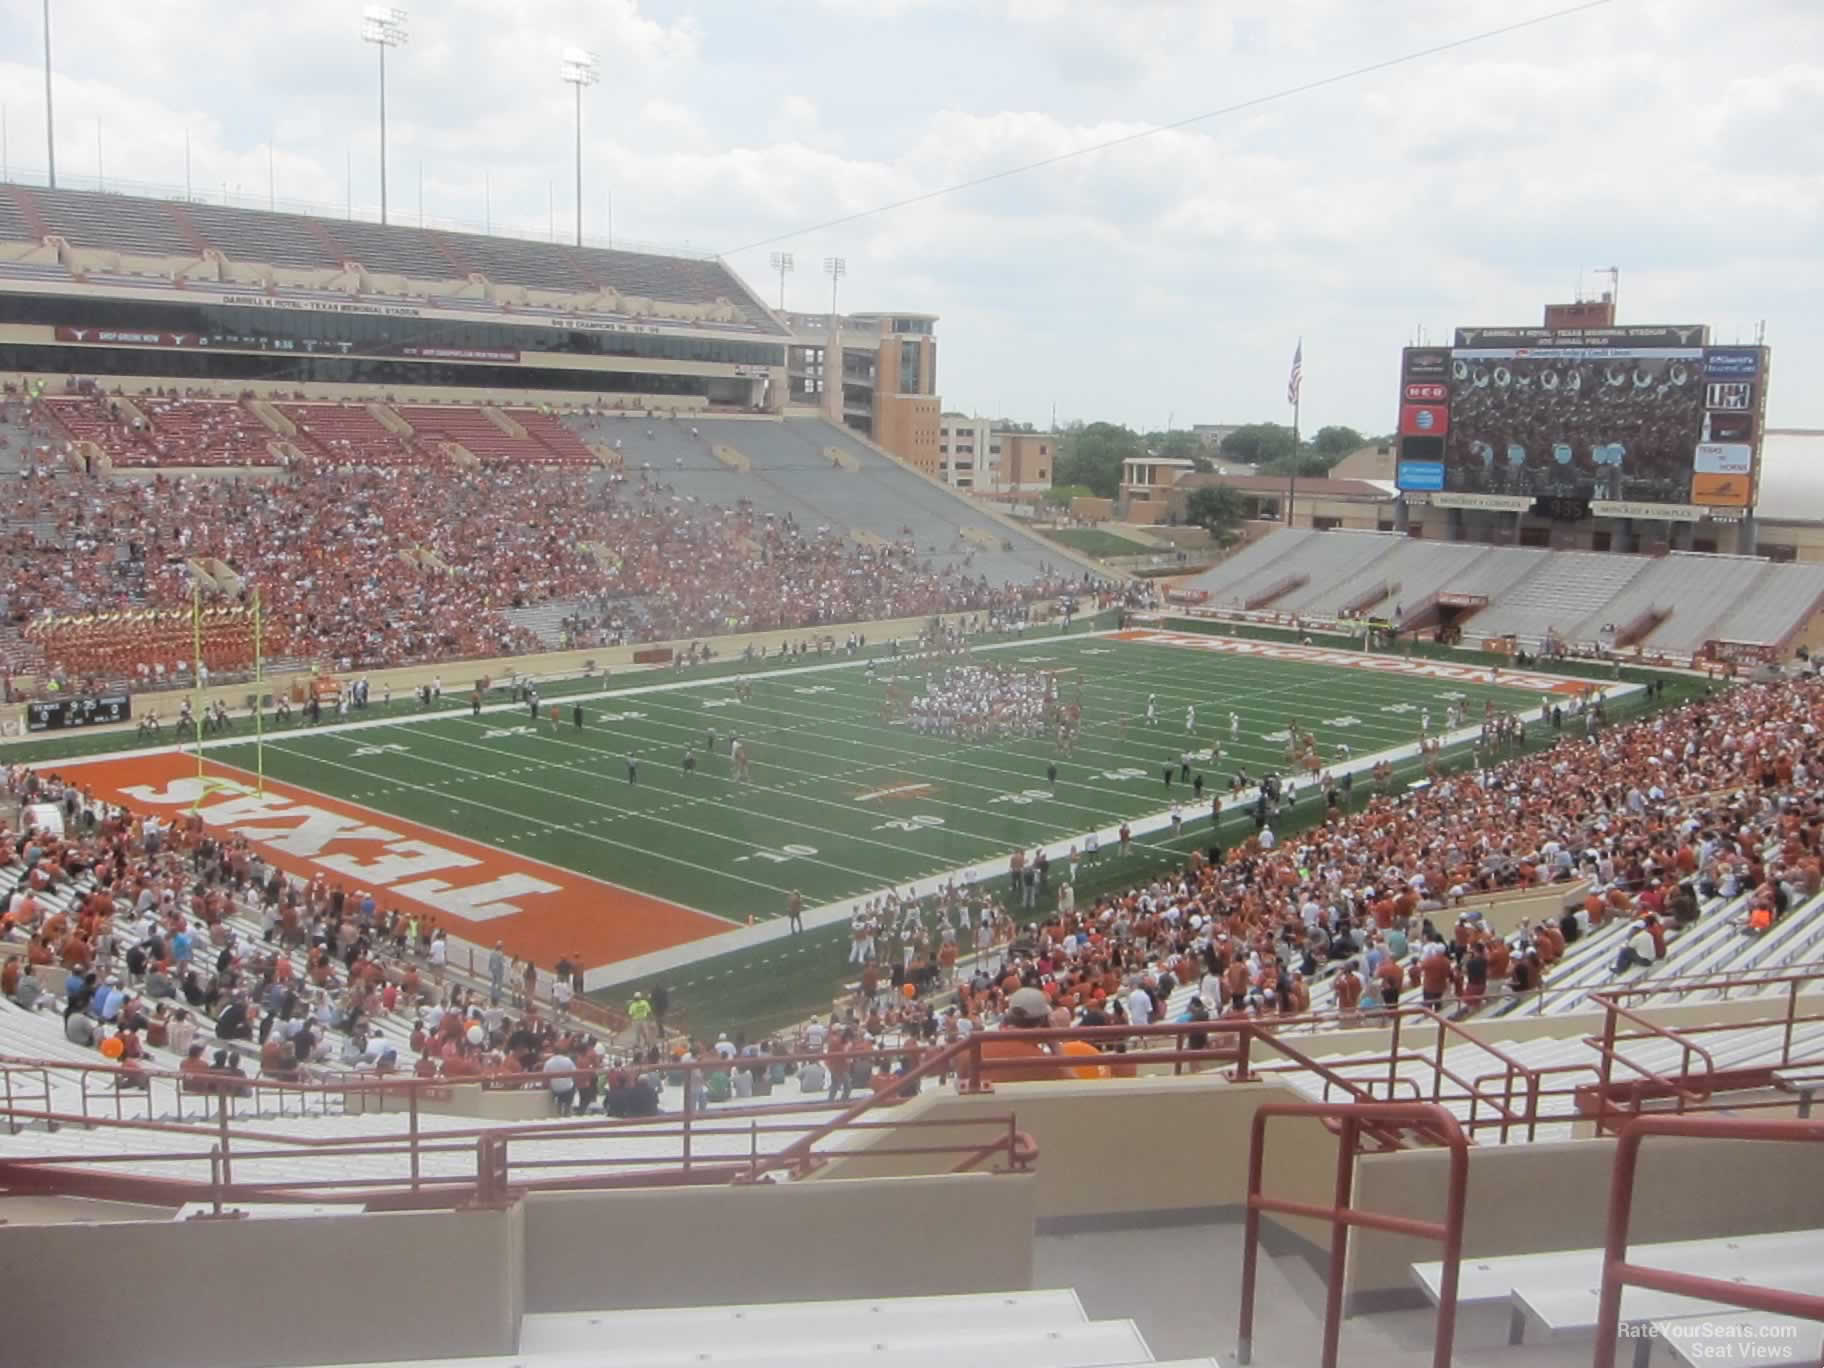 section 12, row 63 seat view  - dkr-texas memorial stadium